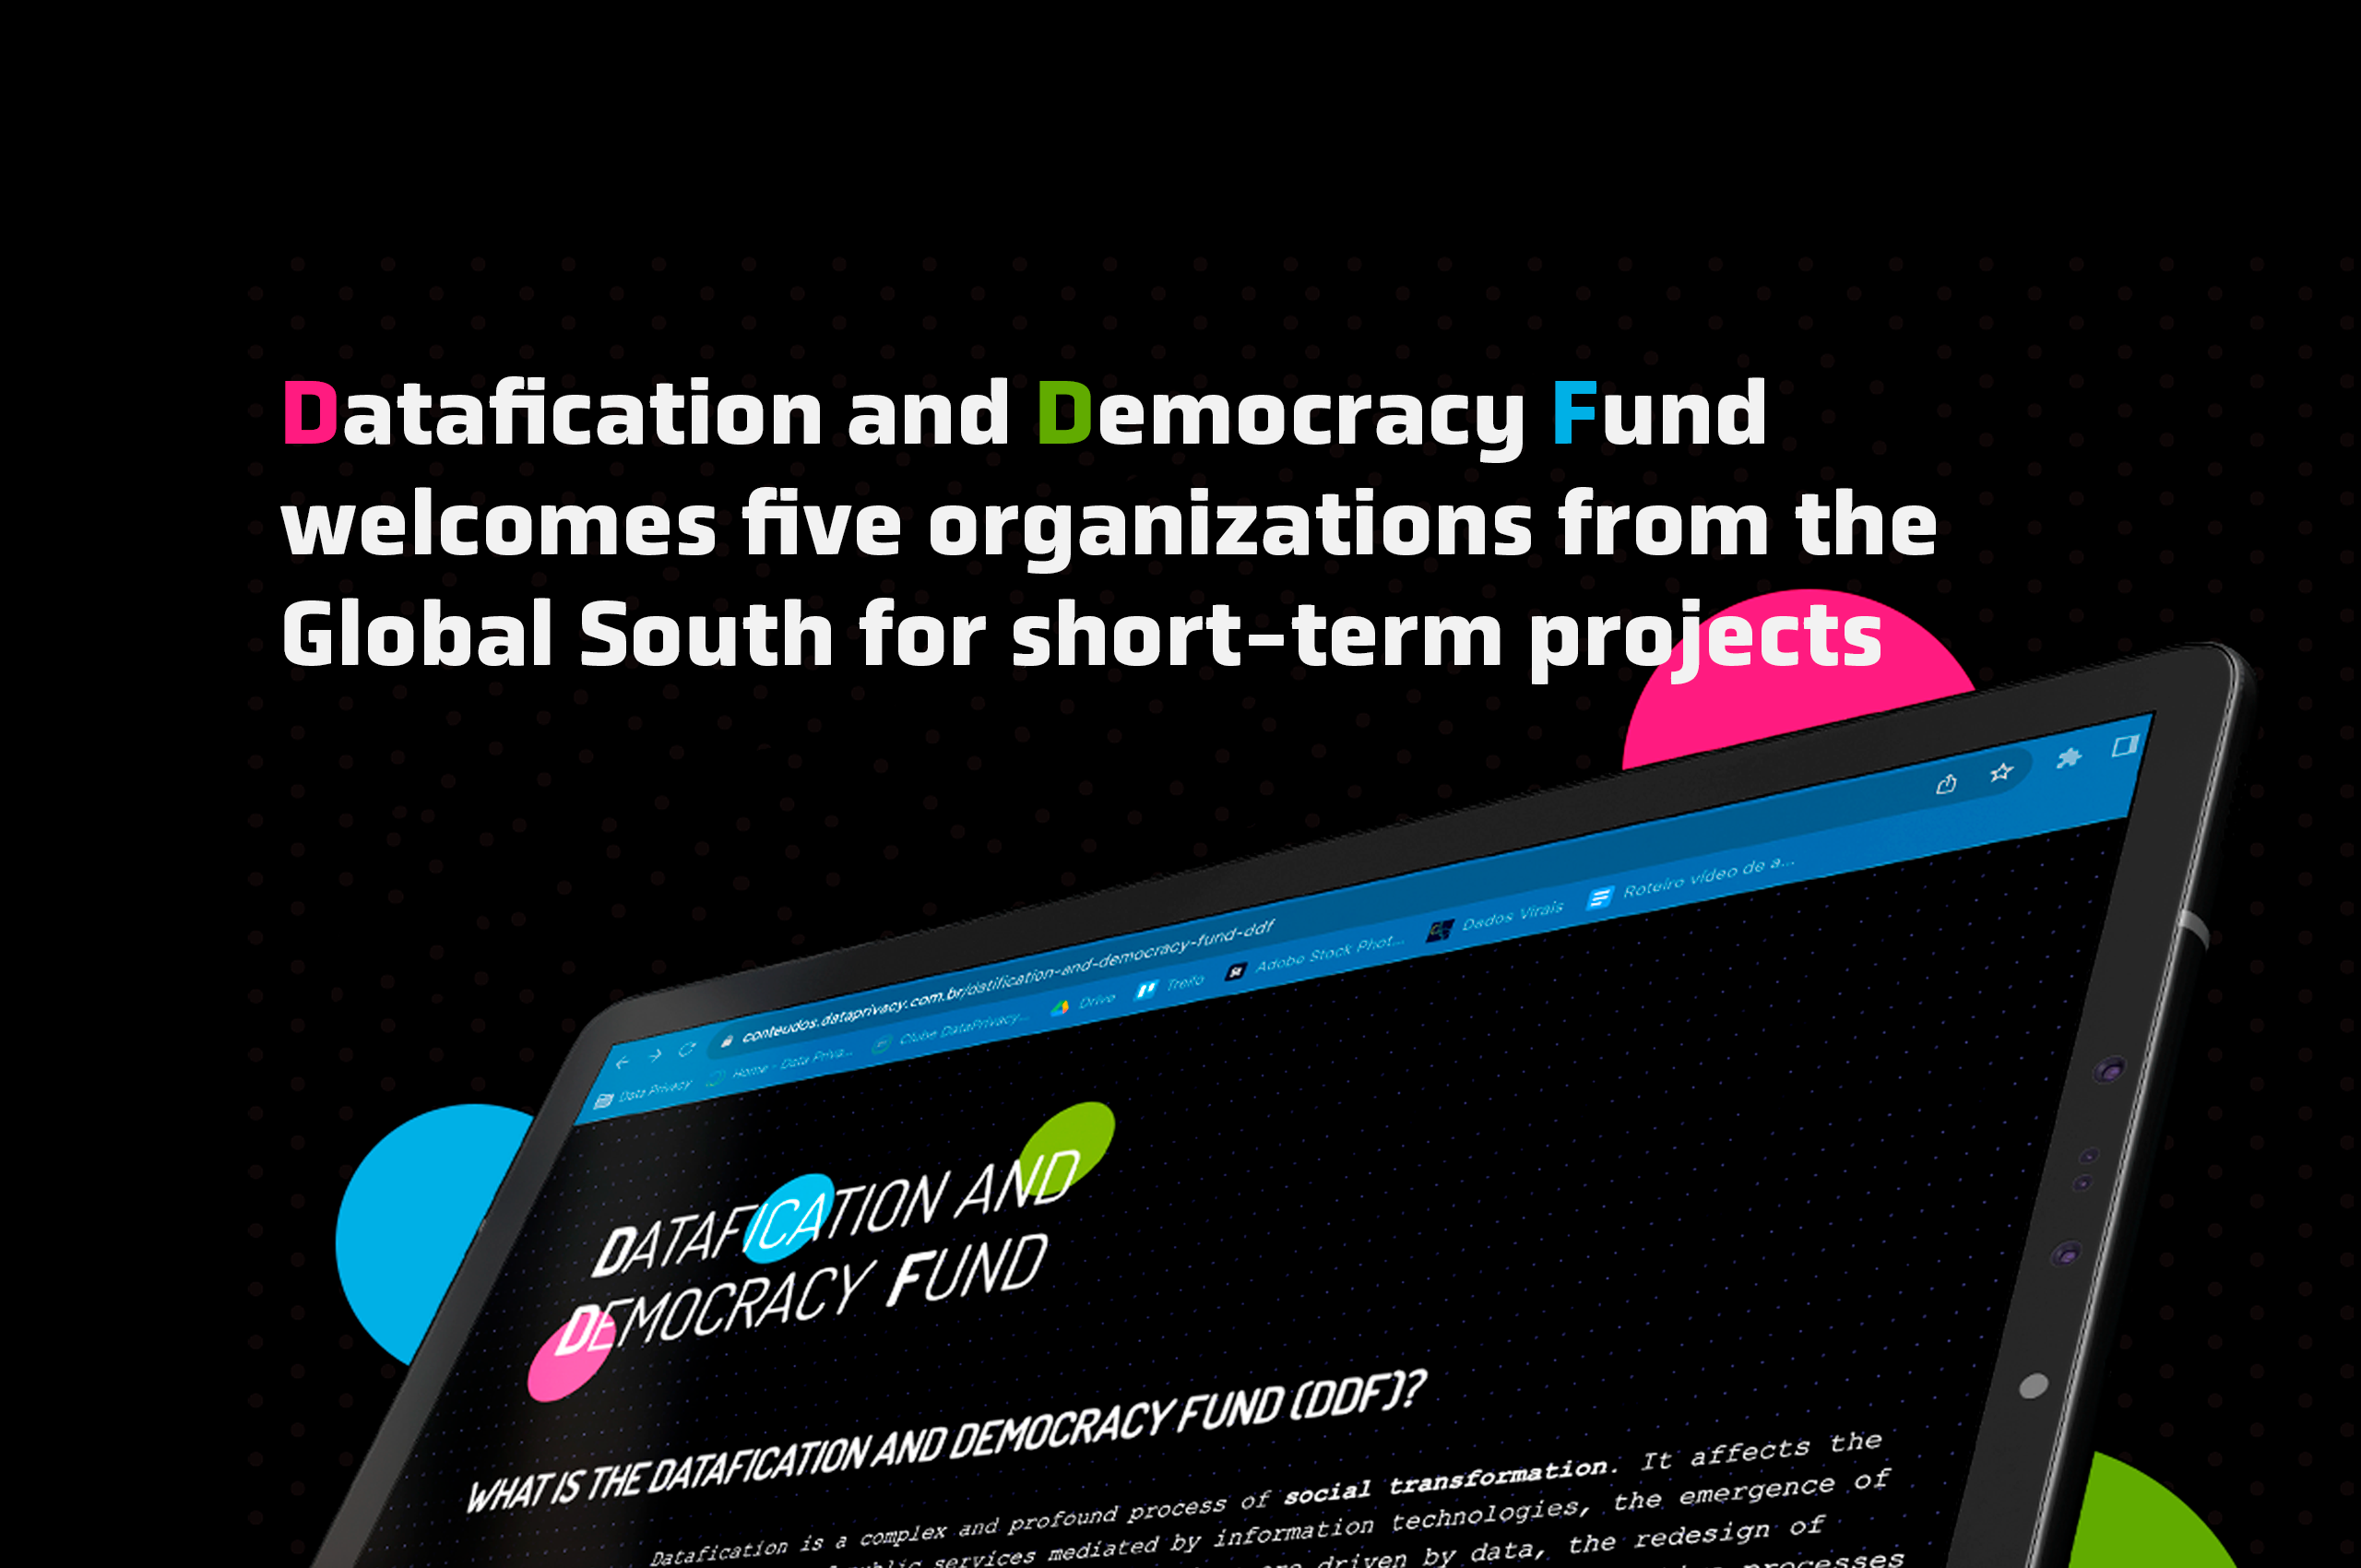 http://Datafication%20and%20Democracy%20Fund%20welcomes%20five%20organizations%20from%20the%20Global%20South%20for%20short-term%20projects